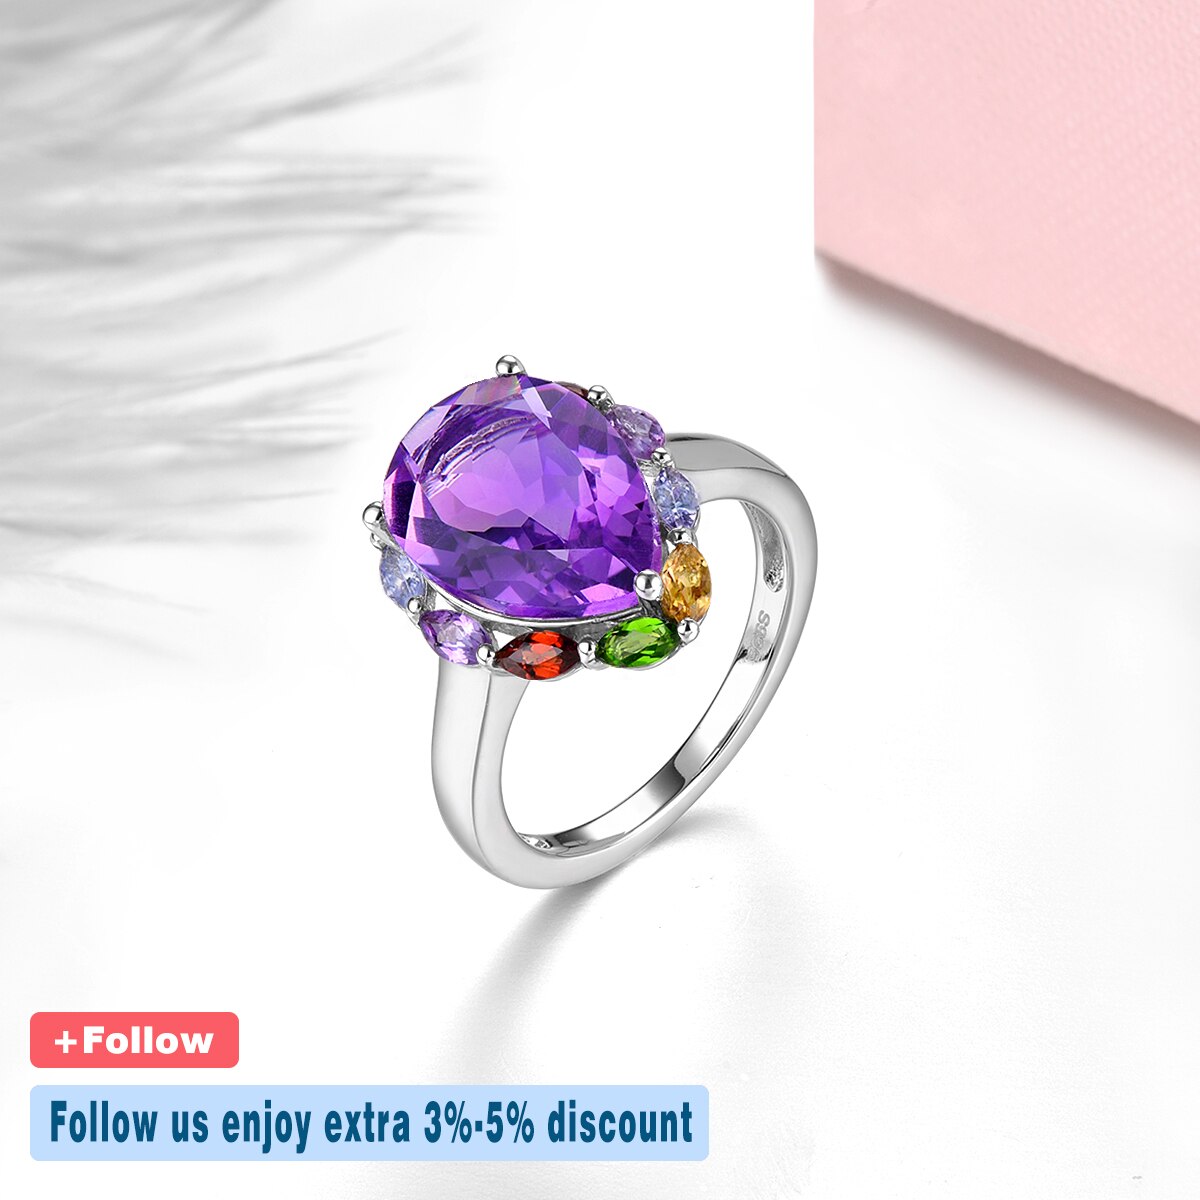 Natural Amethyst Solid Silver Ring 5.8 Carats Genuine Gemstone Diopside Garnet Multicolor Women Romantic Exquisite Style Jewelry